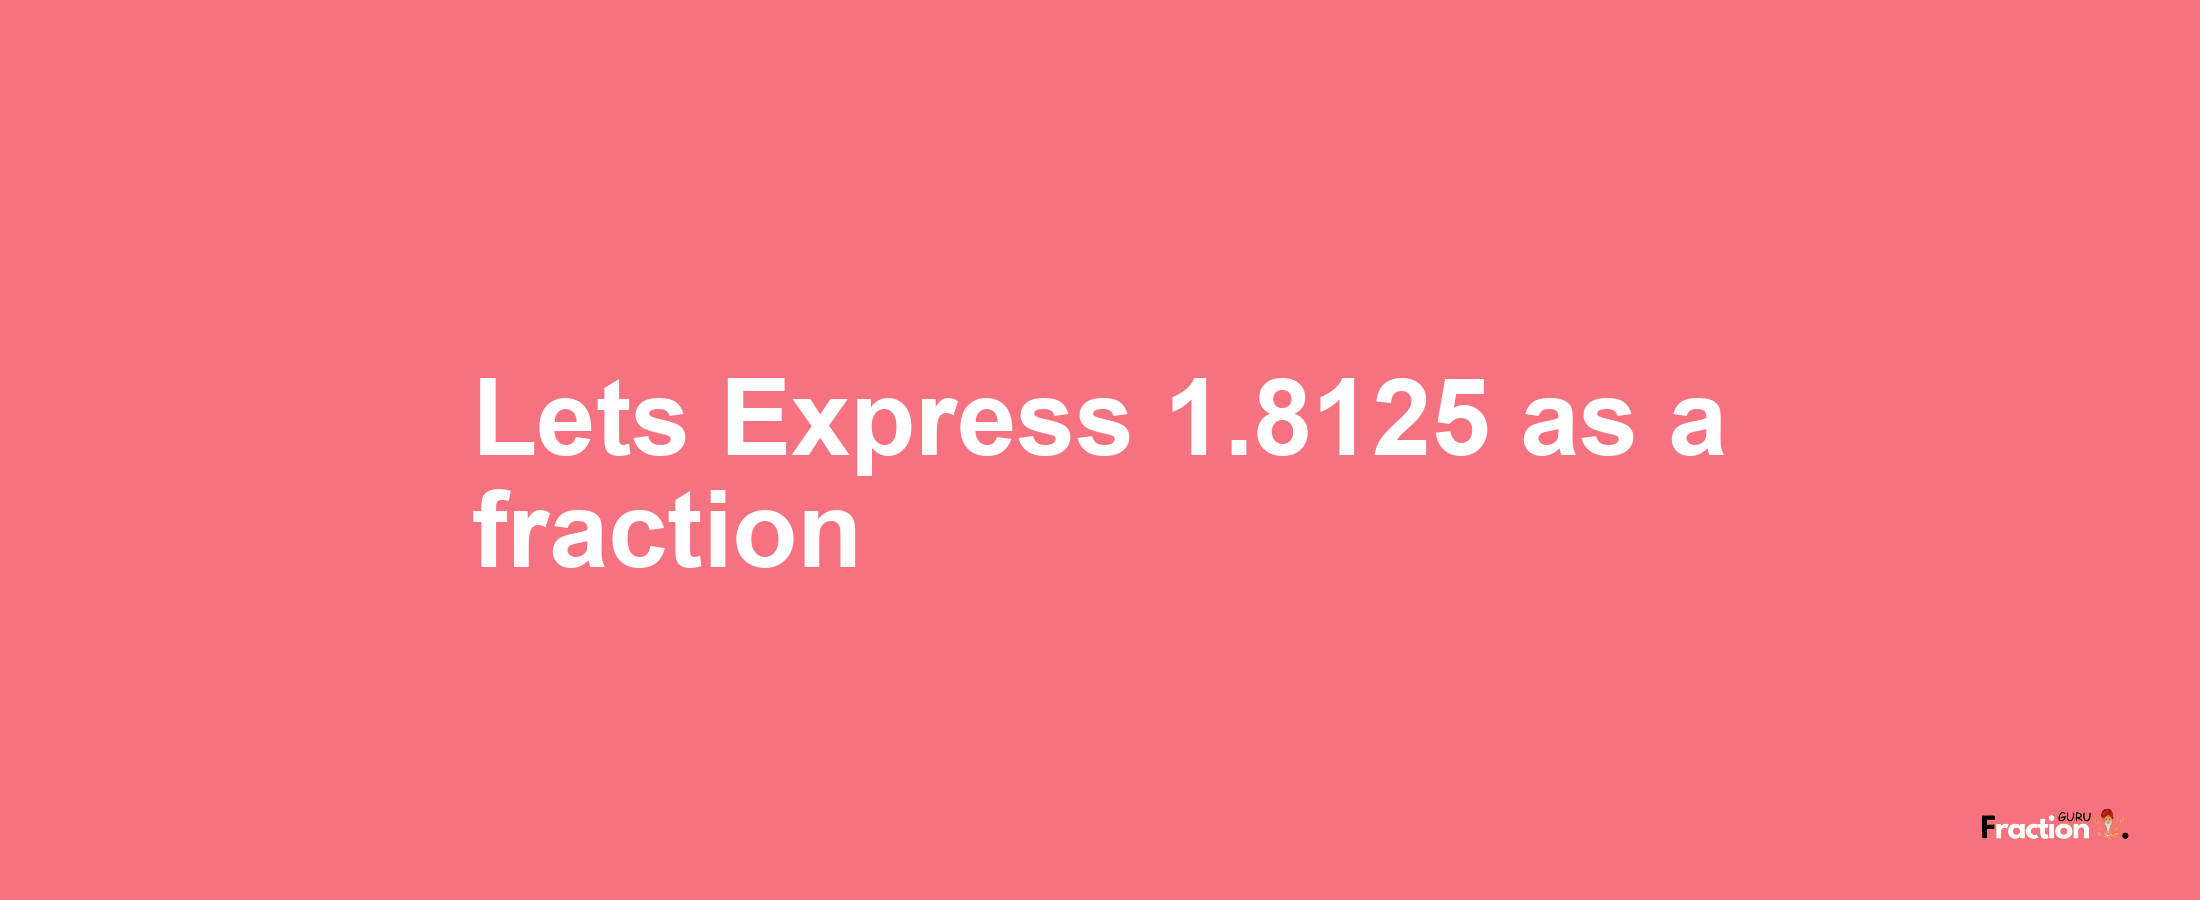 Lets Express 1.8125 as afraction